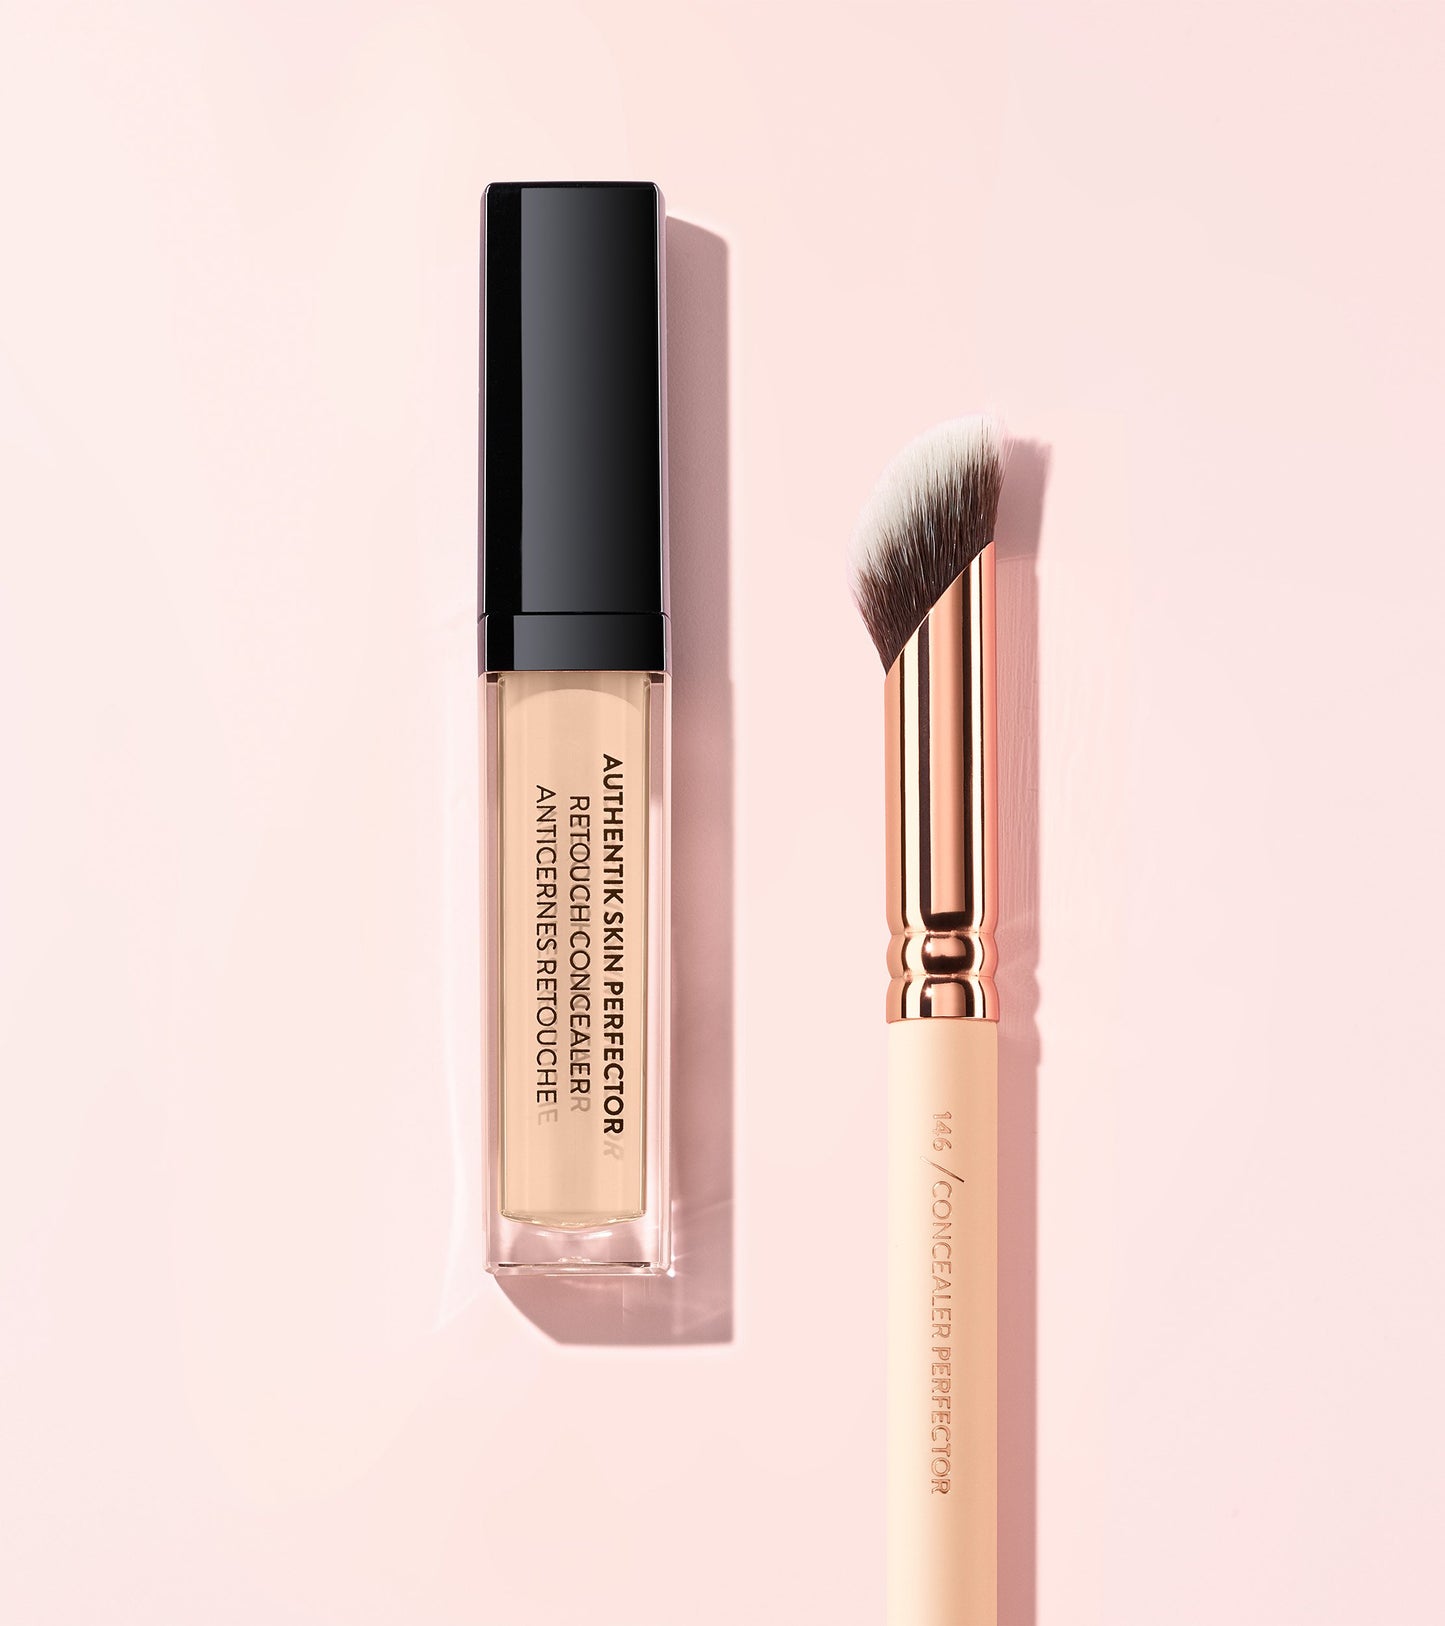 AUTHENTIK SKIN PERFECTOR CONCEALER (090 DEPENDABLE) Expanded Image 3